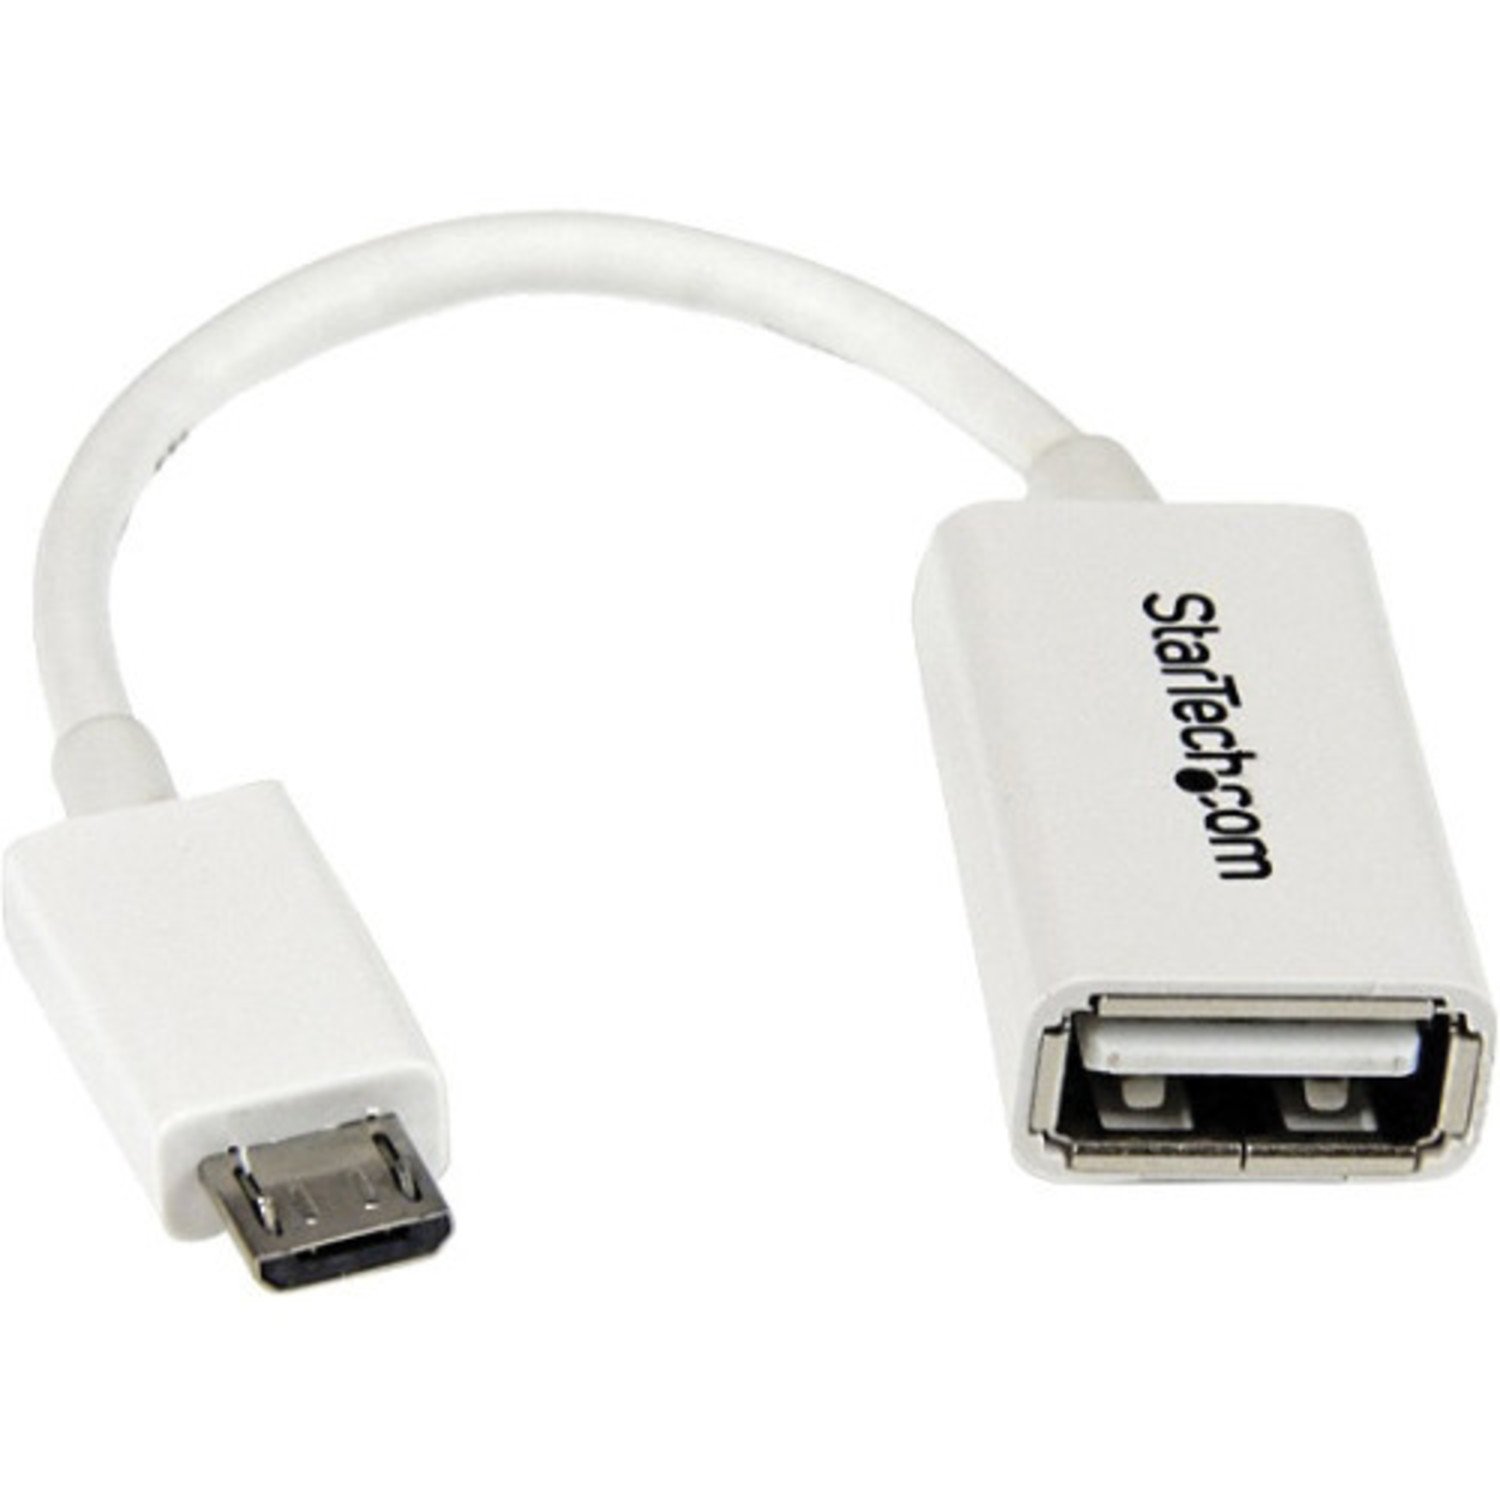 Startech usb 2.0 Cable 5in wht Micro to usb adapter M/F, - kite+key, Rutgers Store